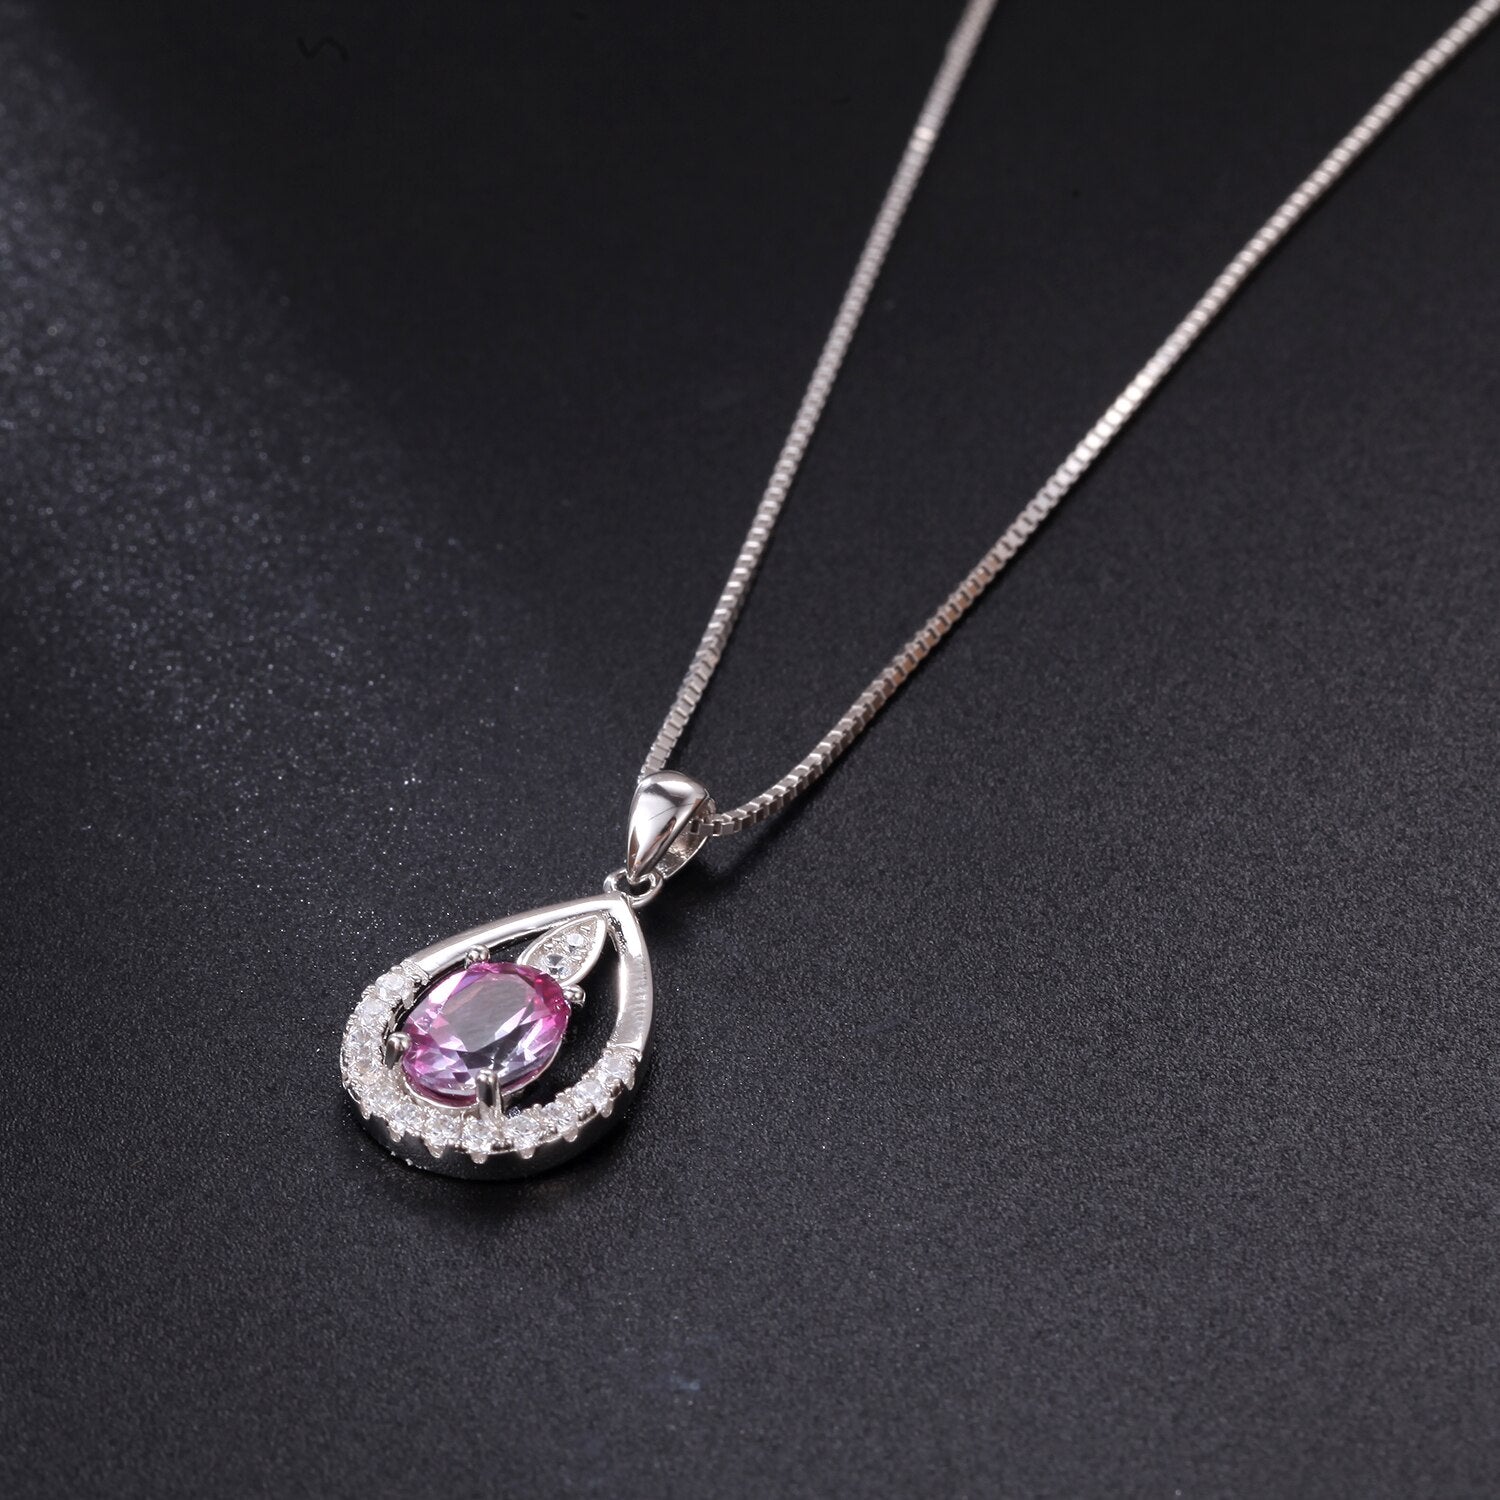 Gem&#39;s Ballet December Birthstone Topaz Necklace 6x8mm Oval Pink Topaz Pendant Necklace in 925 Sterling Silver with 18&quot; Chain